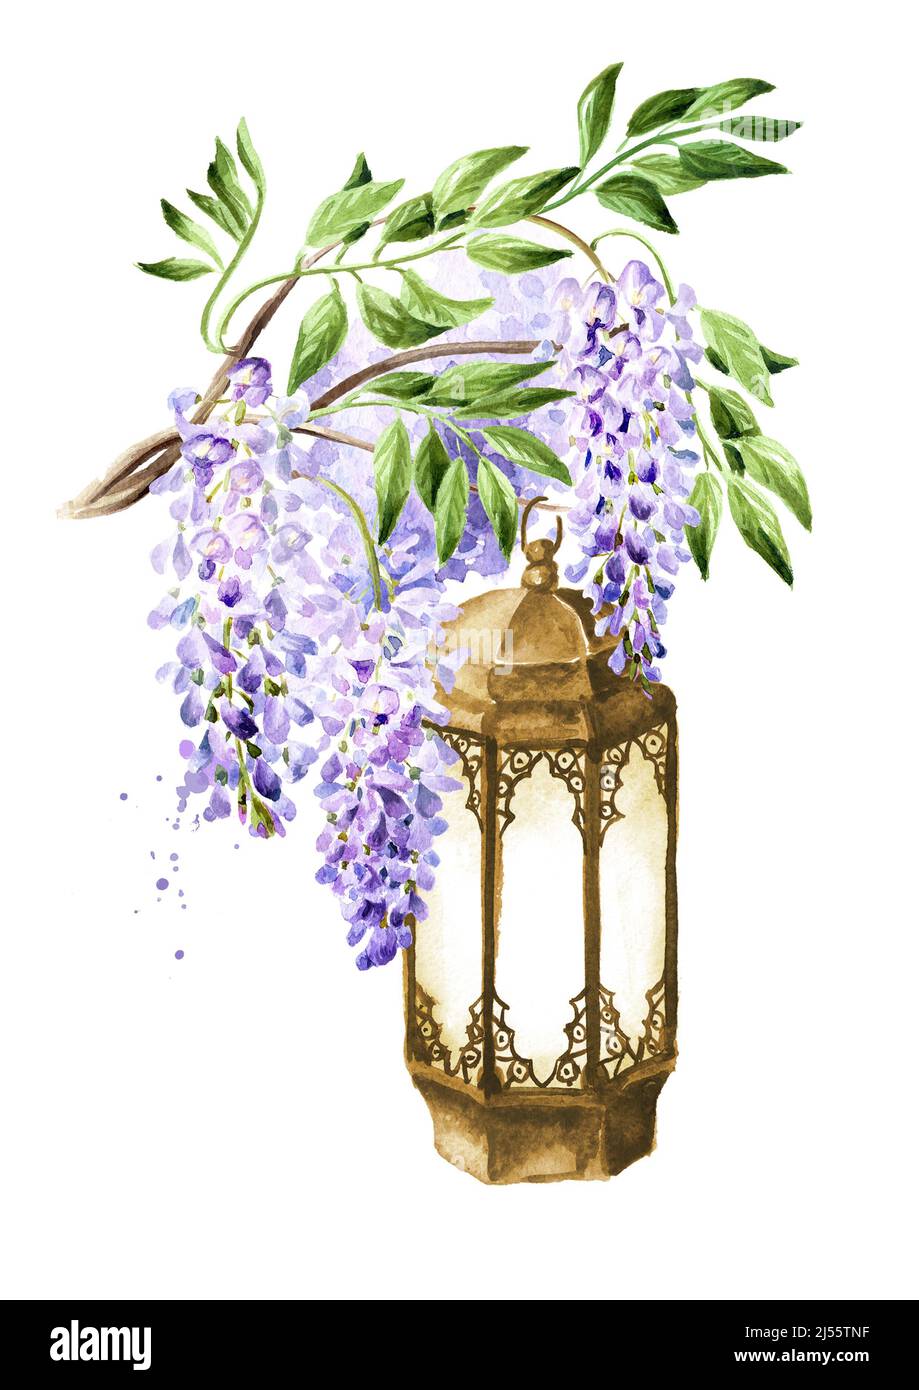 Wisteria flower branch and old lantern.  Hand drawn watercolor  illustration isolated on white background Stock Photo